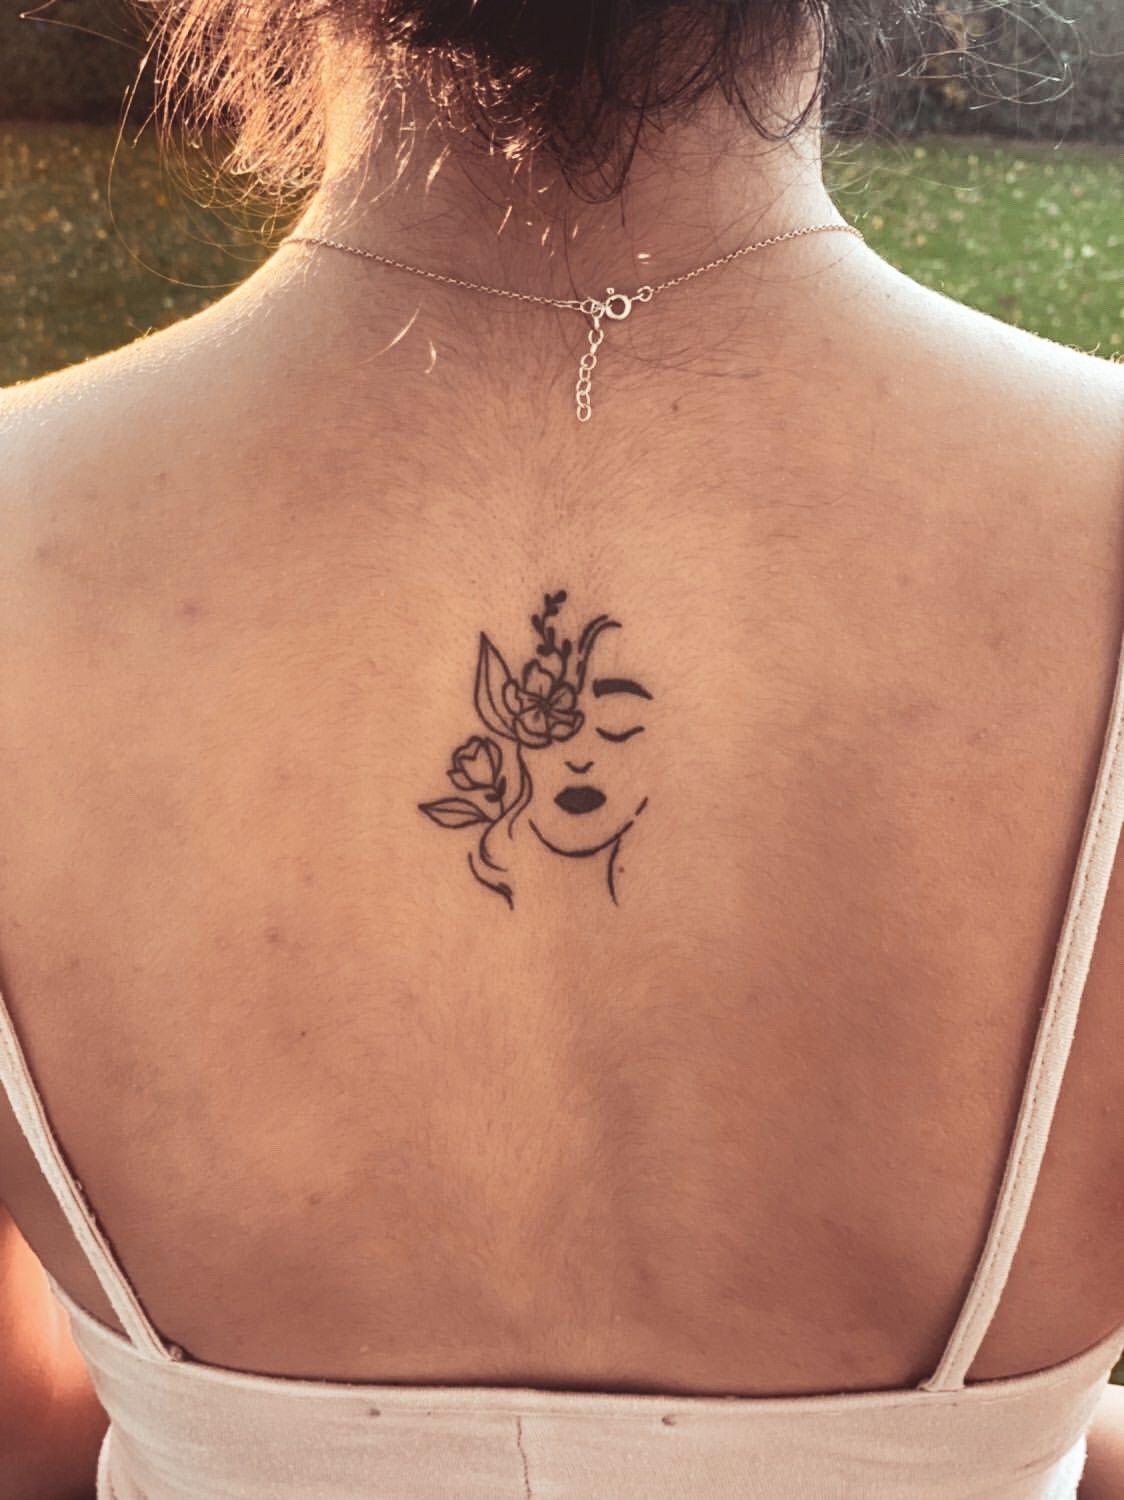 15 Gorgeous Tattoos Inspired by Migraine